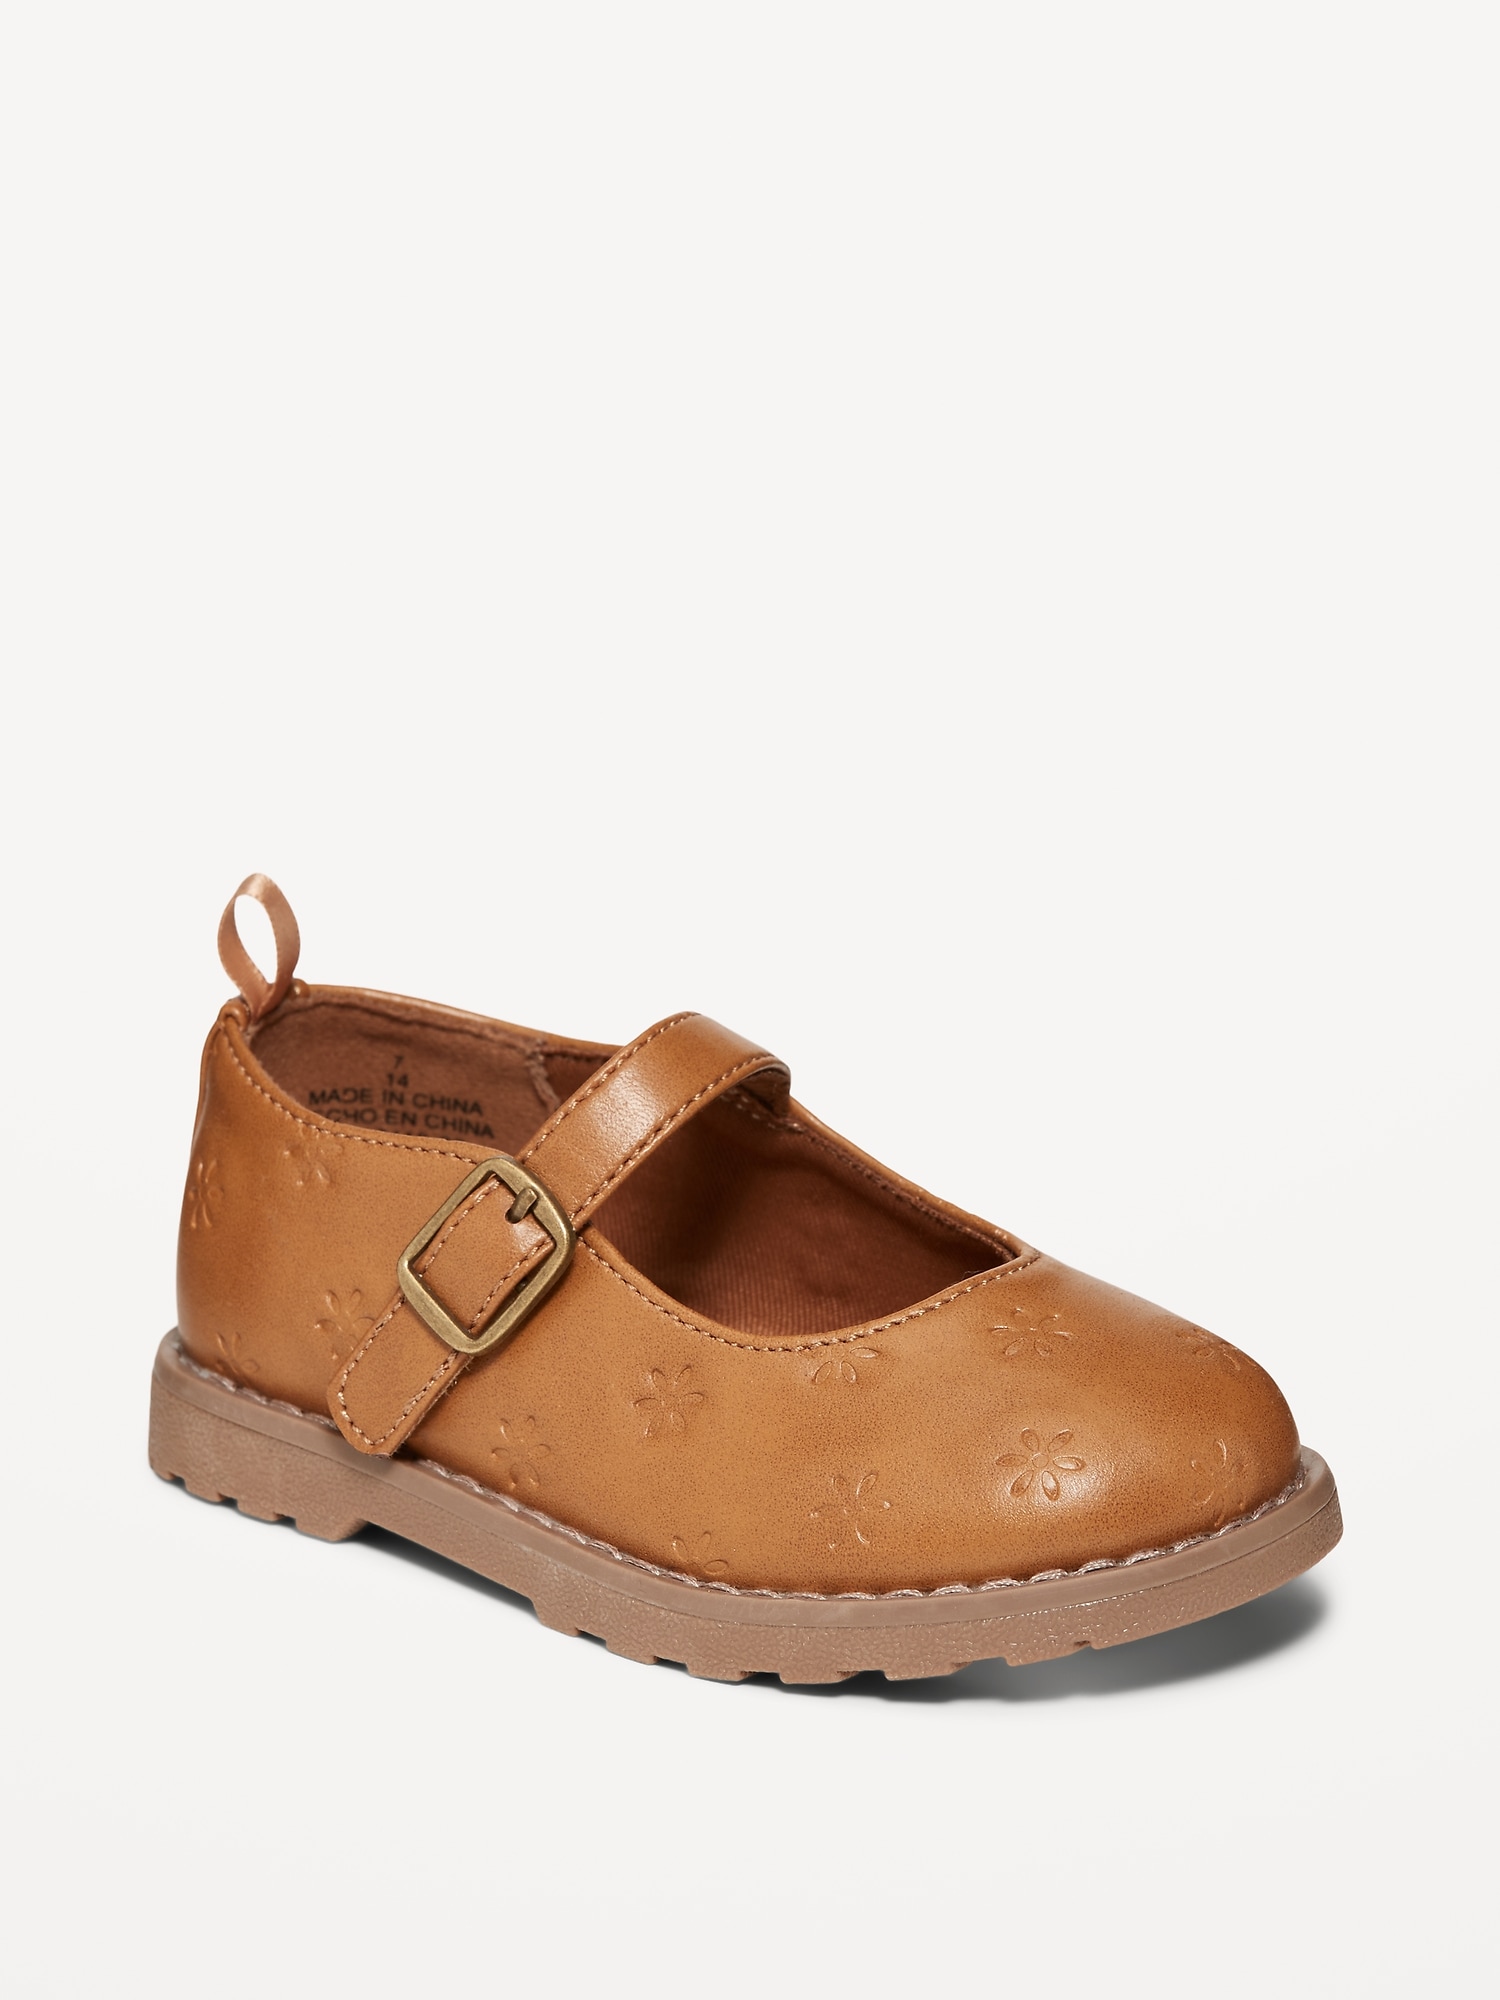 Faux-Leather Mary-Jane Shoes for Toddler Girls | Old Navy